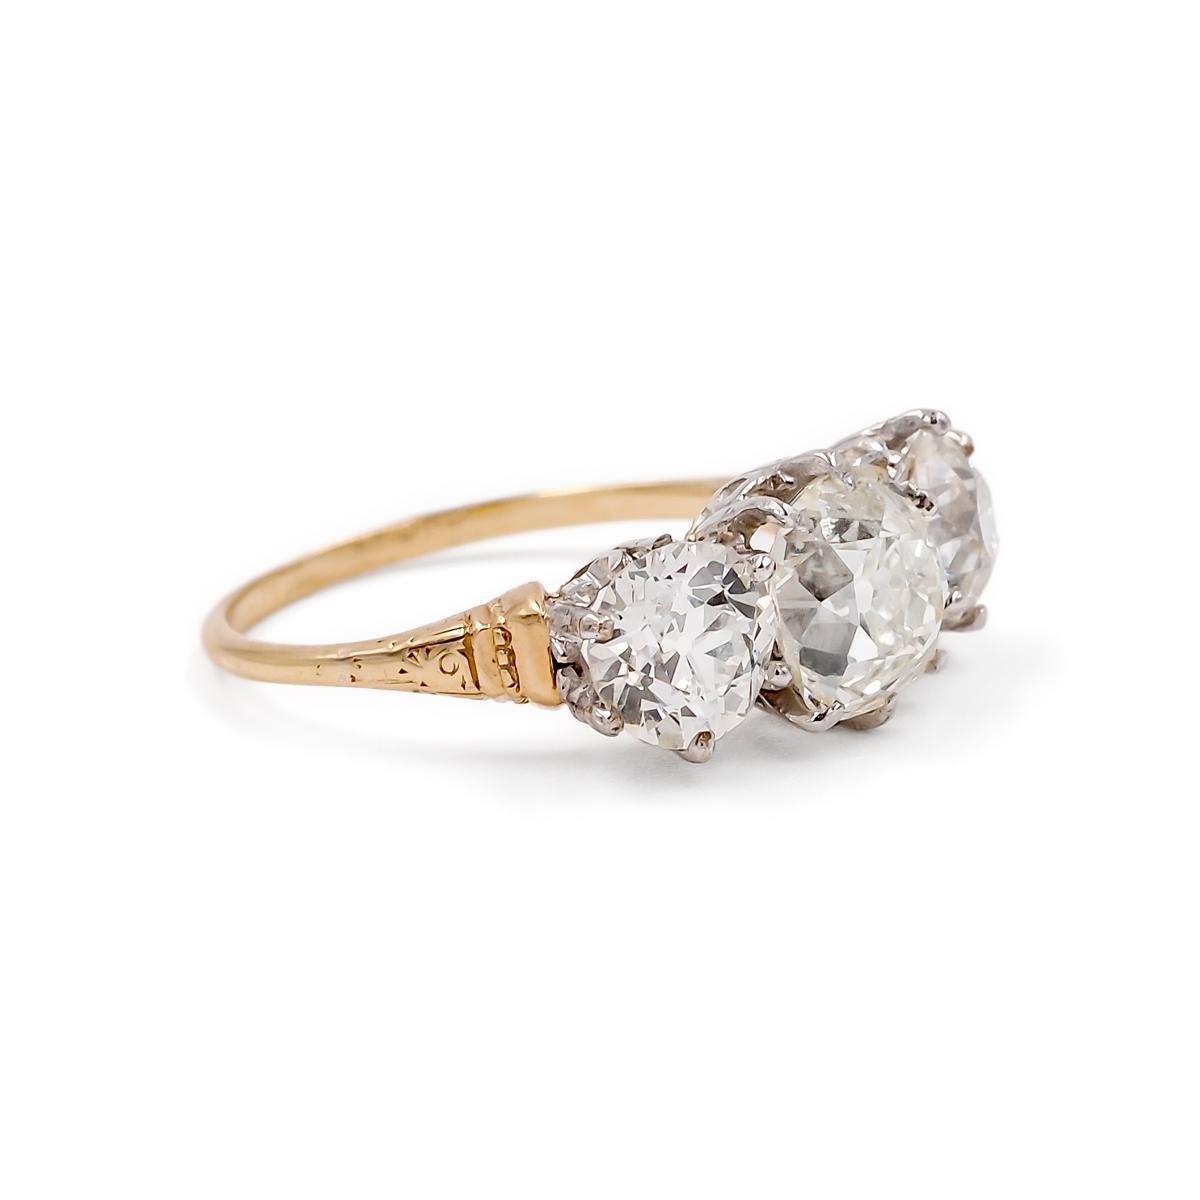 A fine example of Edwardian era craftsmanship. Composed of a platinum top & 14k yellow gold shank with delicate filigree detail. Accompanied by a Professional Gem Sciences Laboratory (P.G.S) Diamond Report stating that the ring features a center